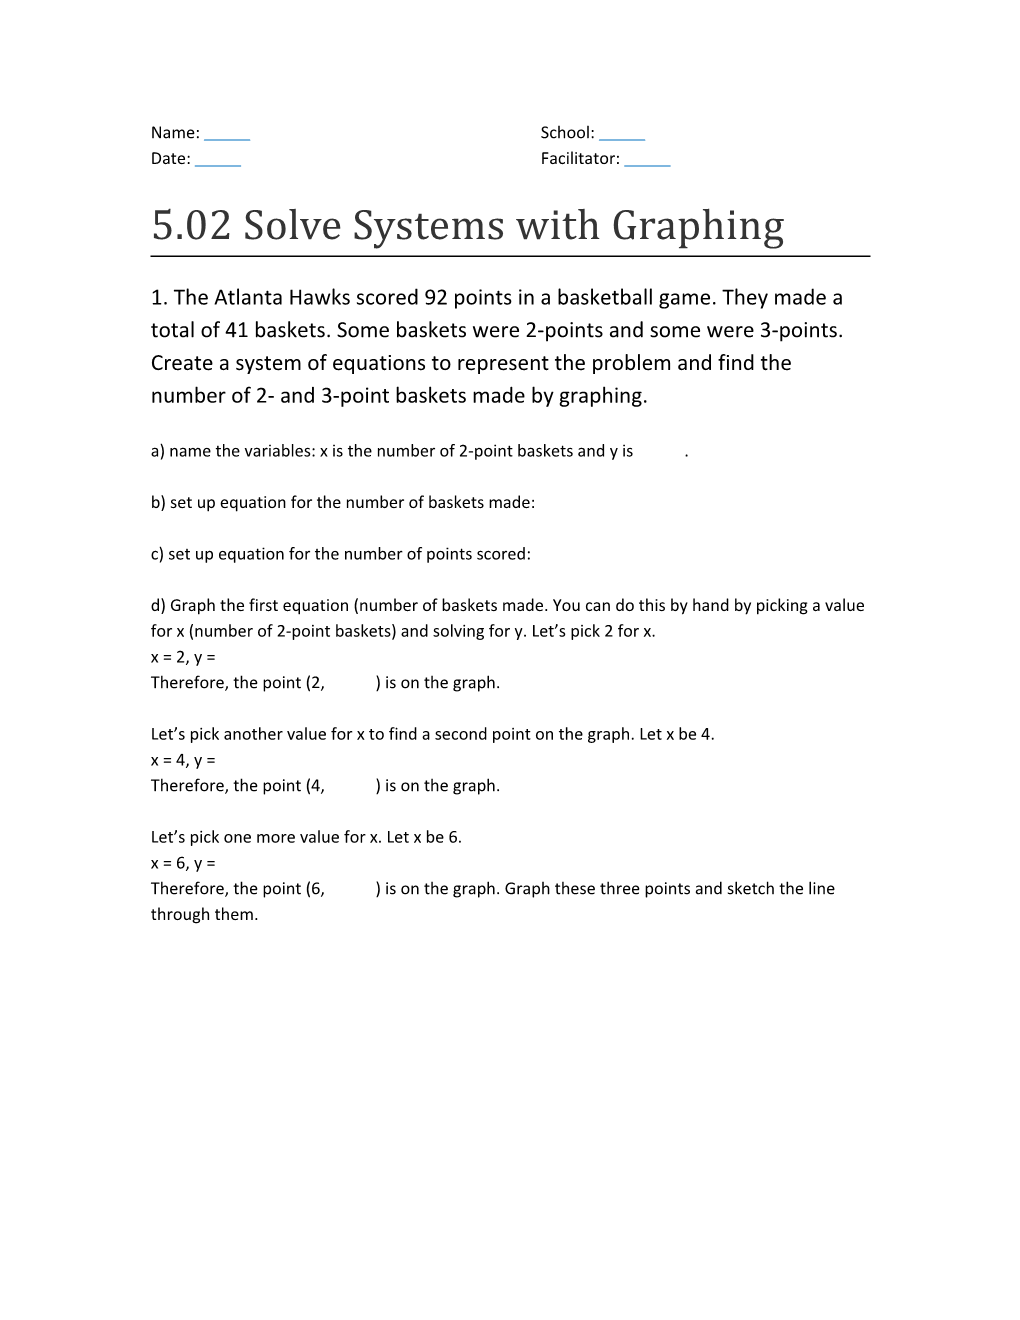 5.02 Solve Systems with Graphing